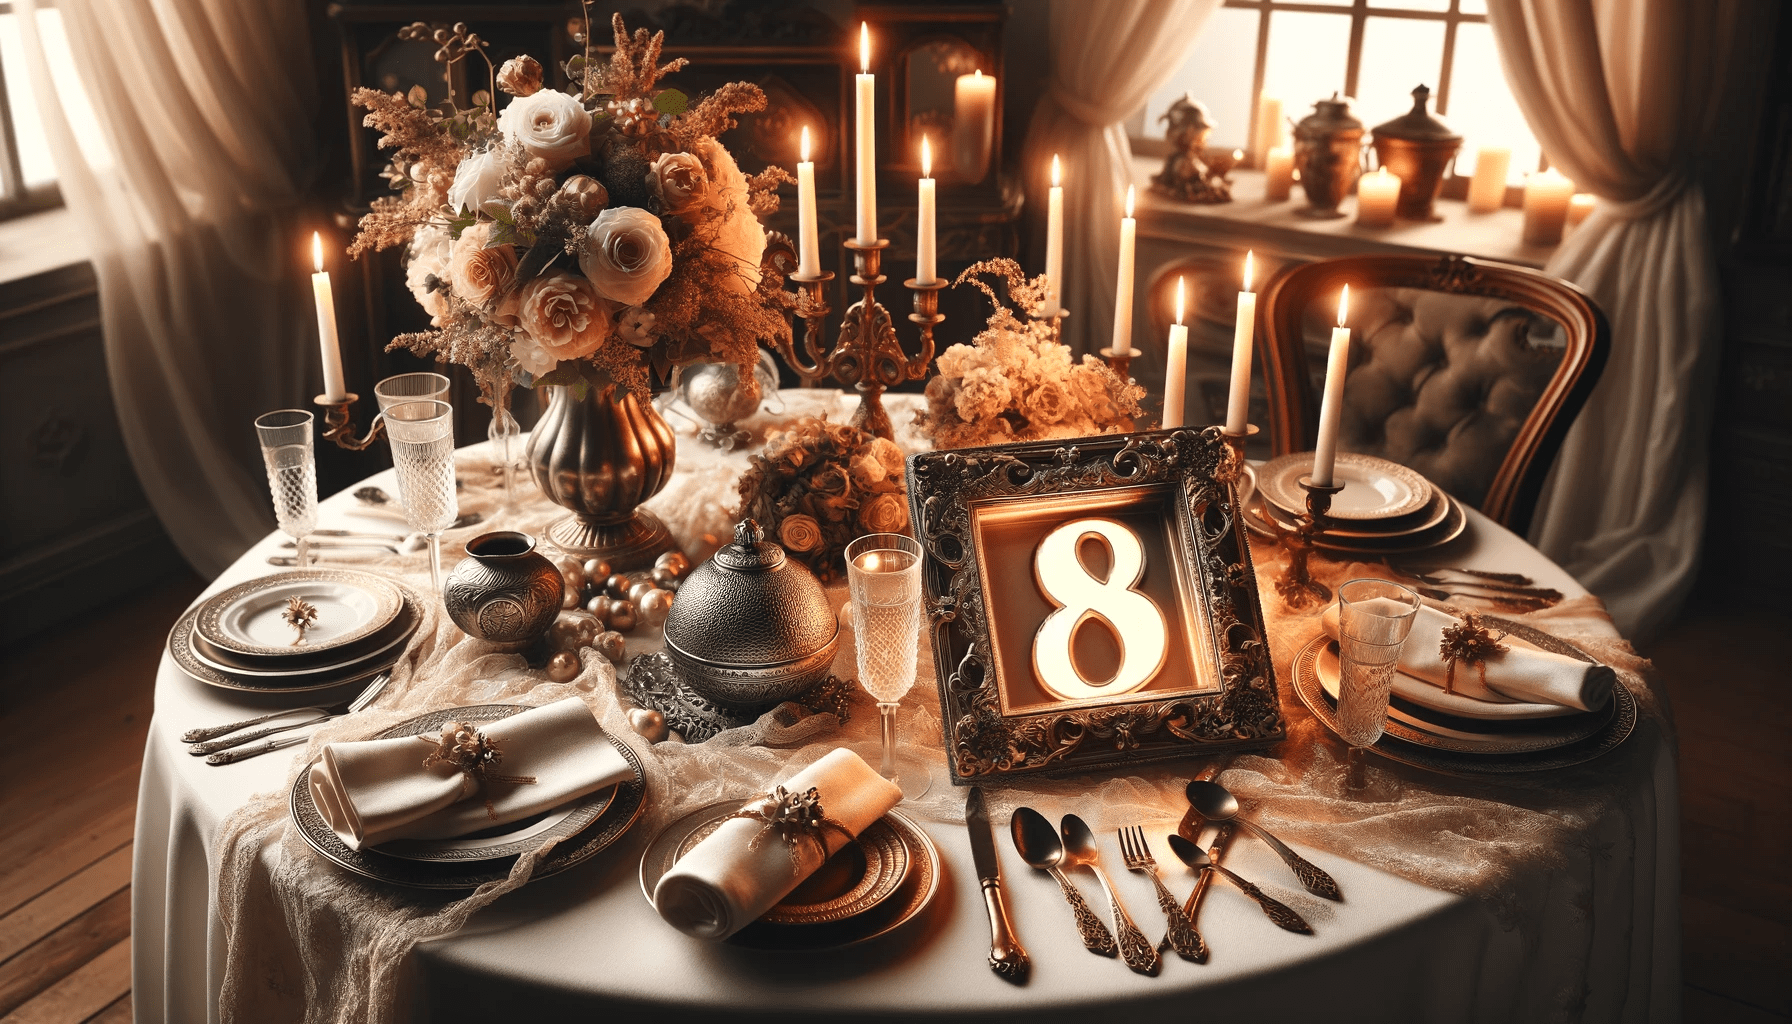 A celebratory image ideal for an article on 8th wedding anniversary celebration ideas and tips. The image should incorporate traditional and modern theme.